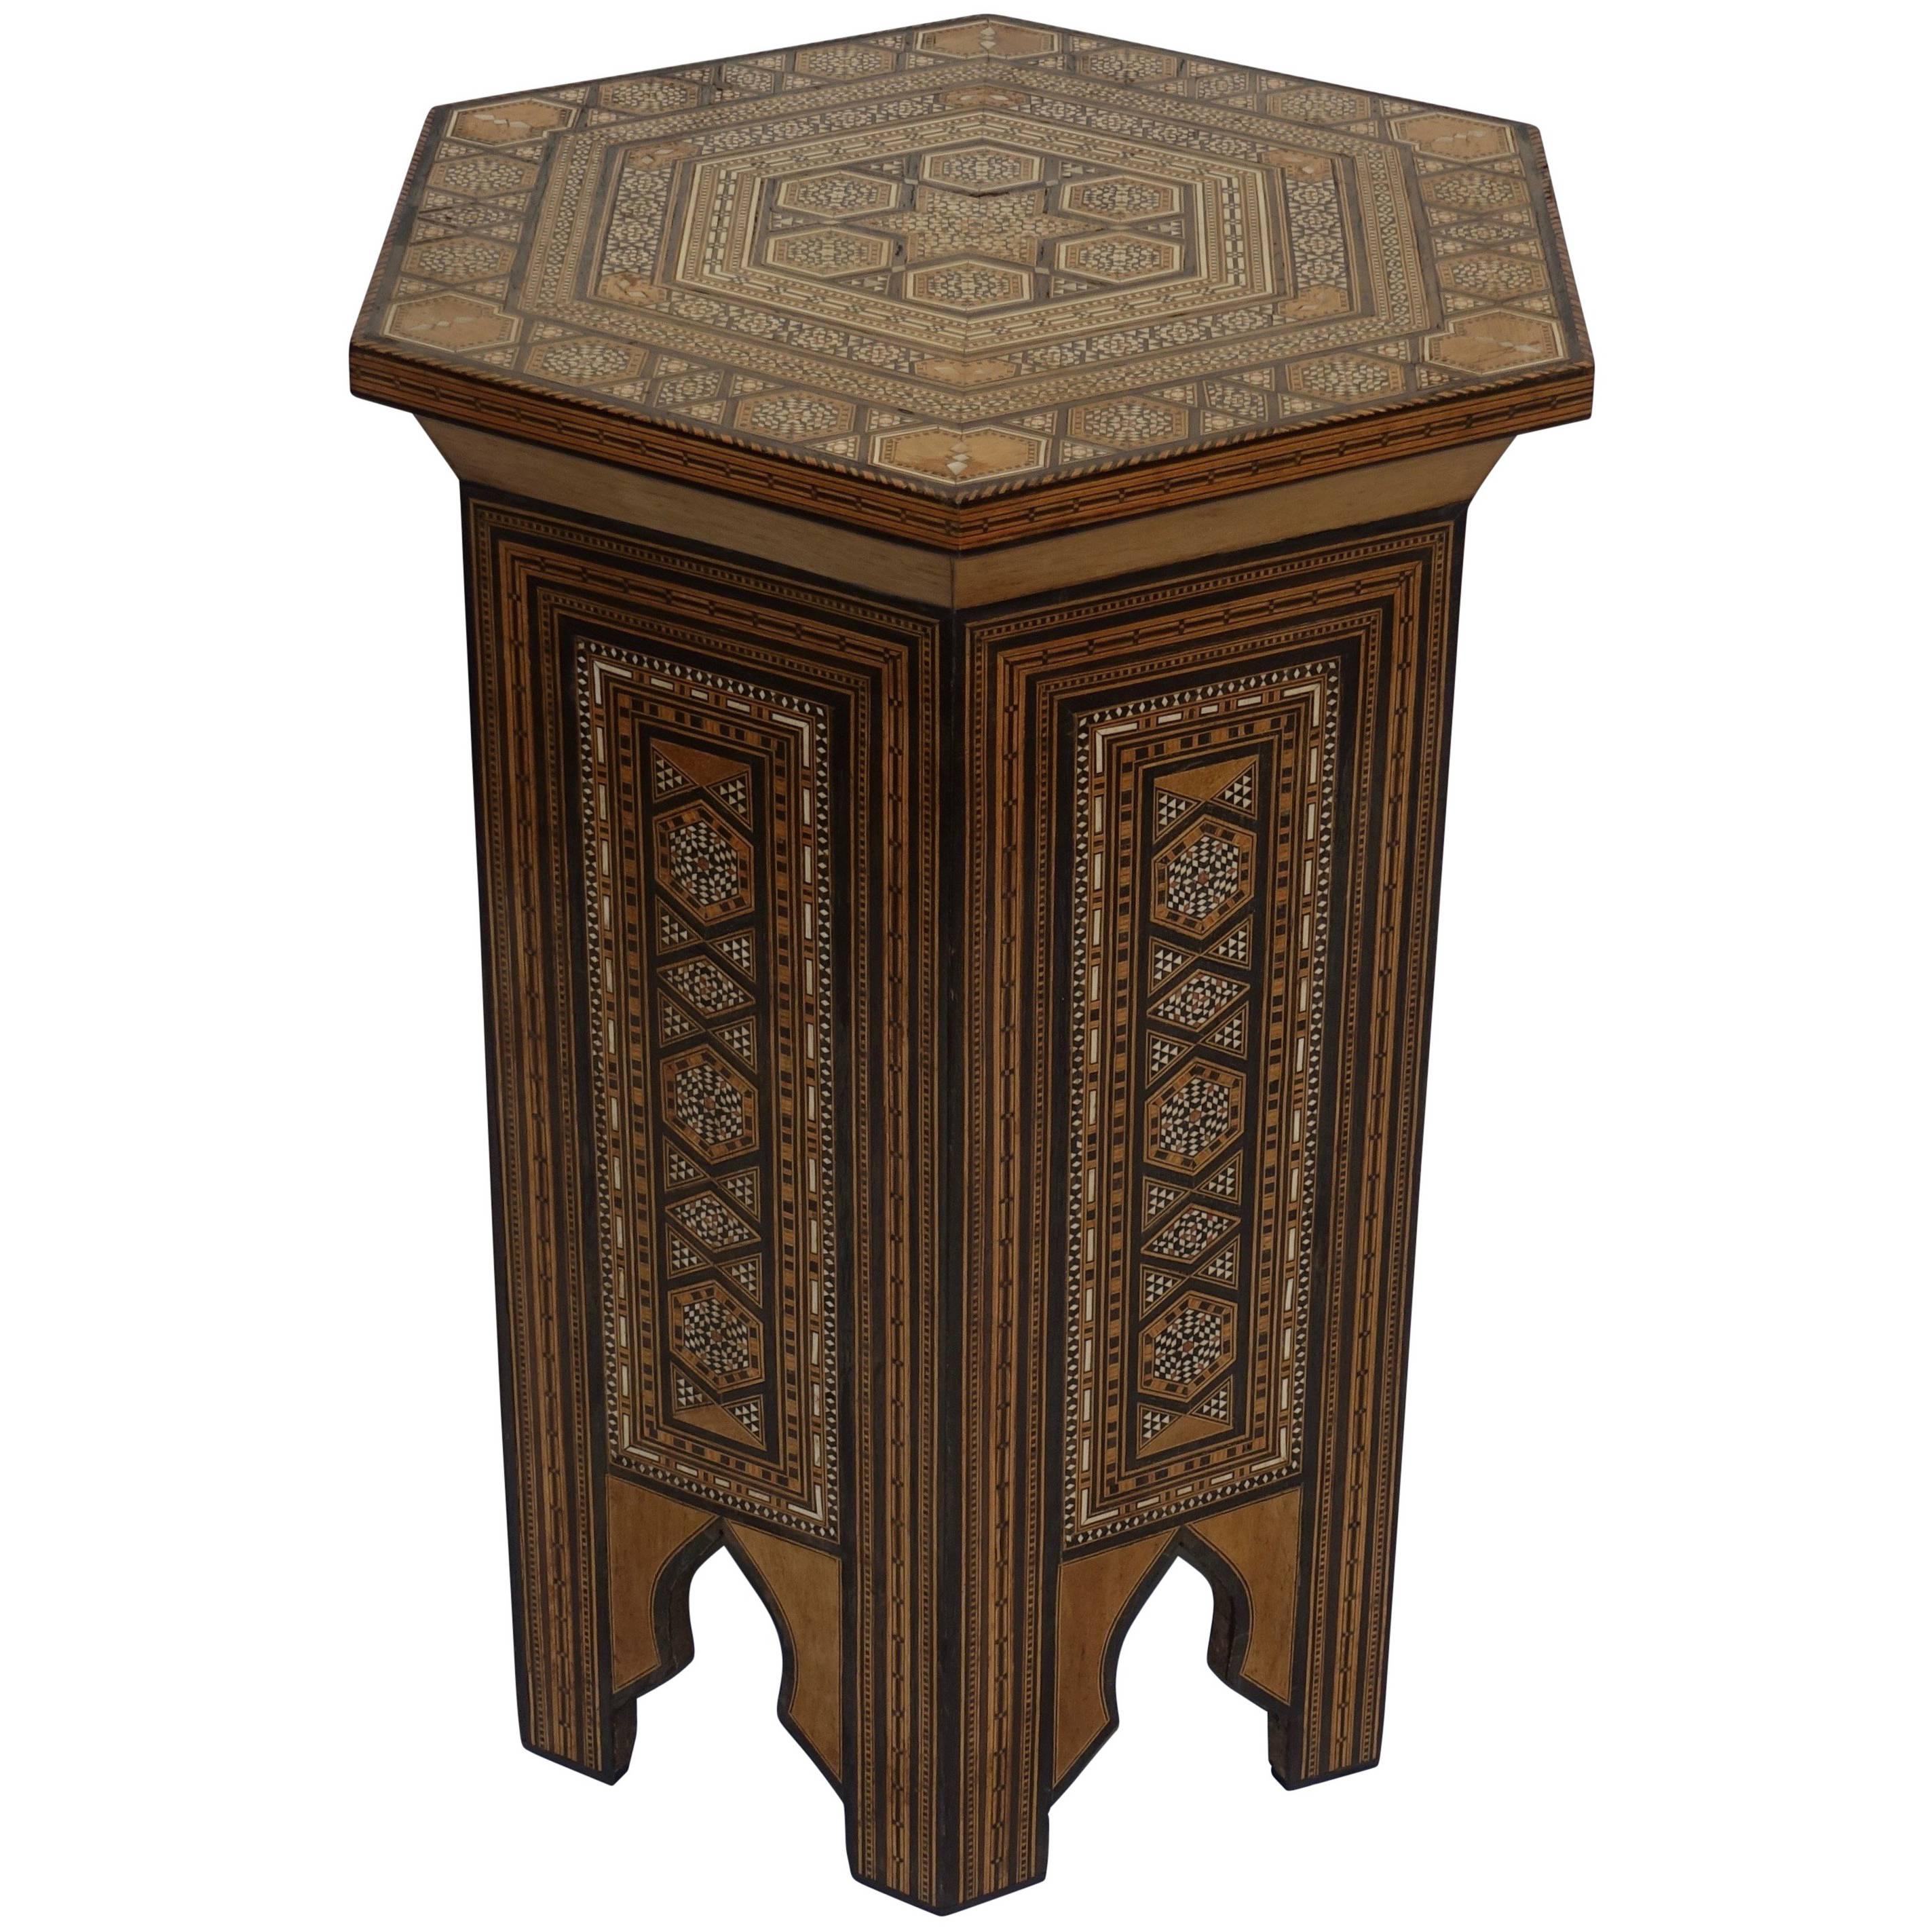 Syrian Tabouret Side Table with Multi Inlay